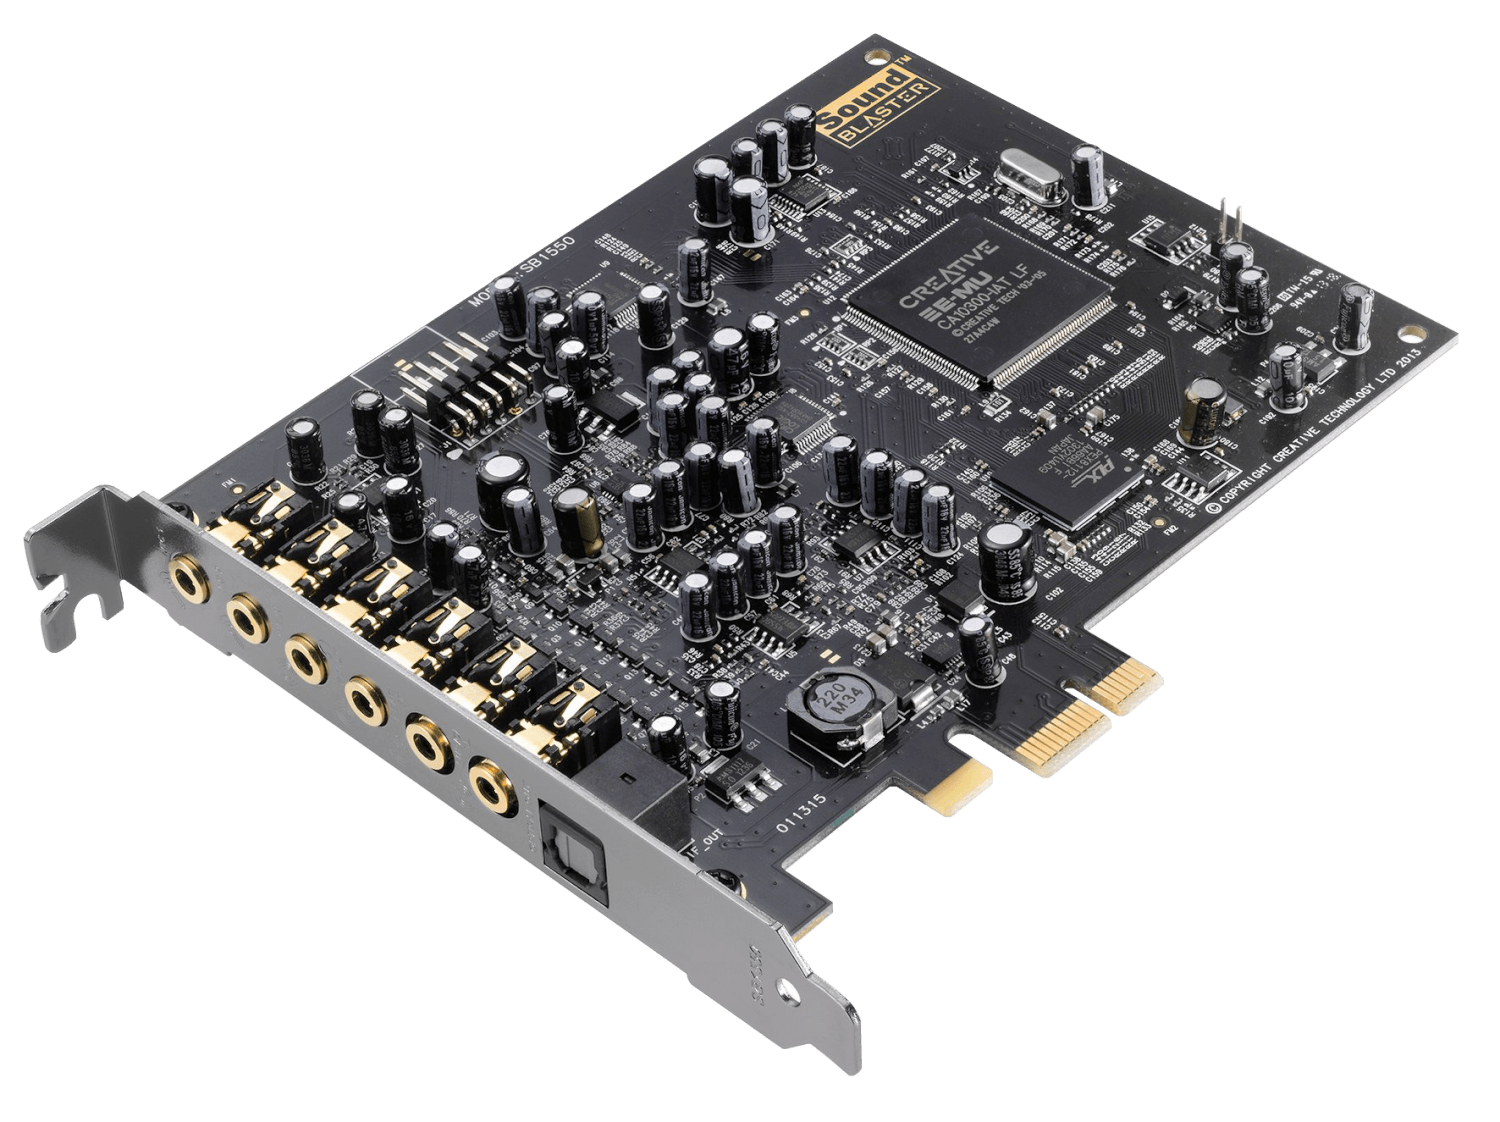 A Creative SoundBlaster sound card with multiple audio input and output jacks, including a digital Toslink connector